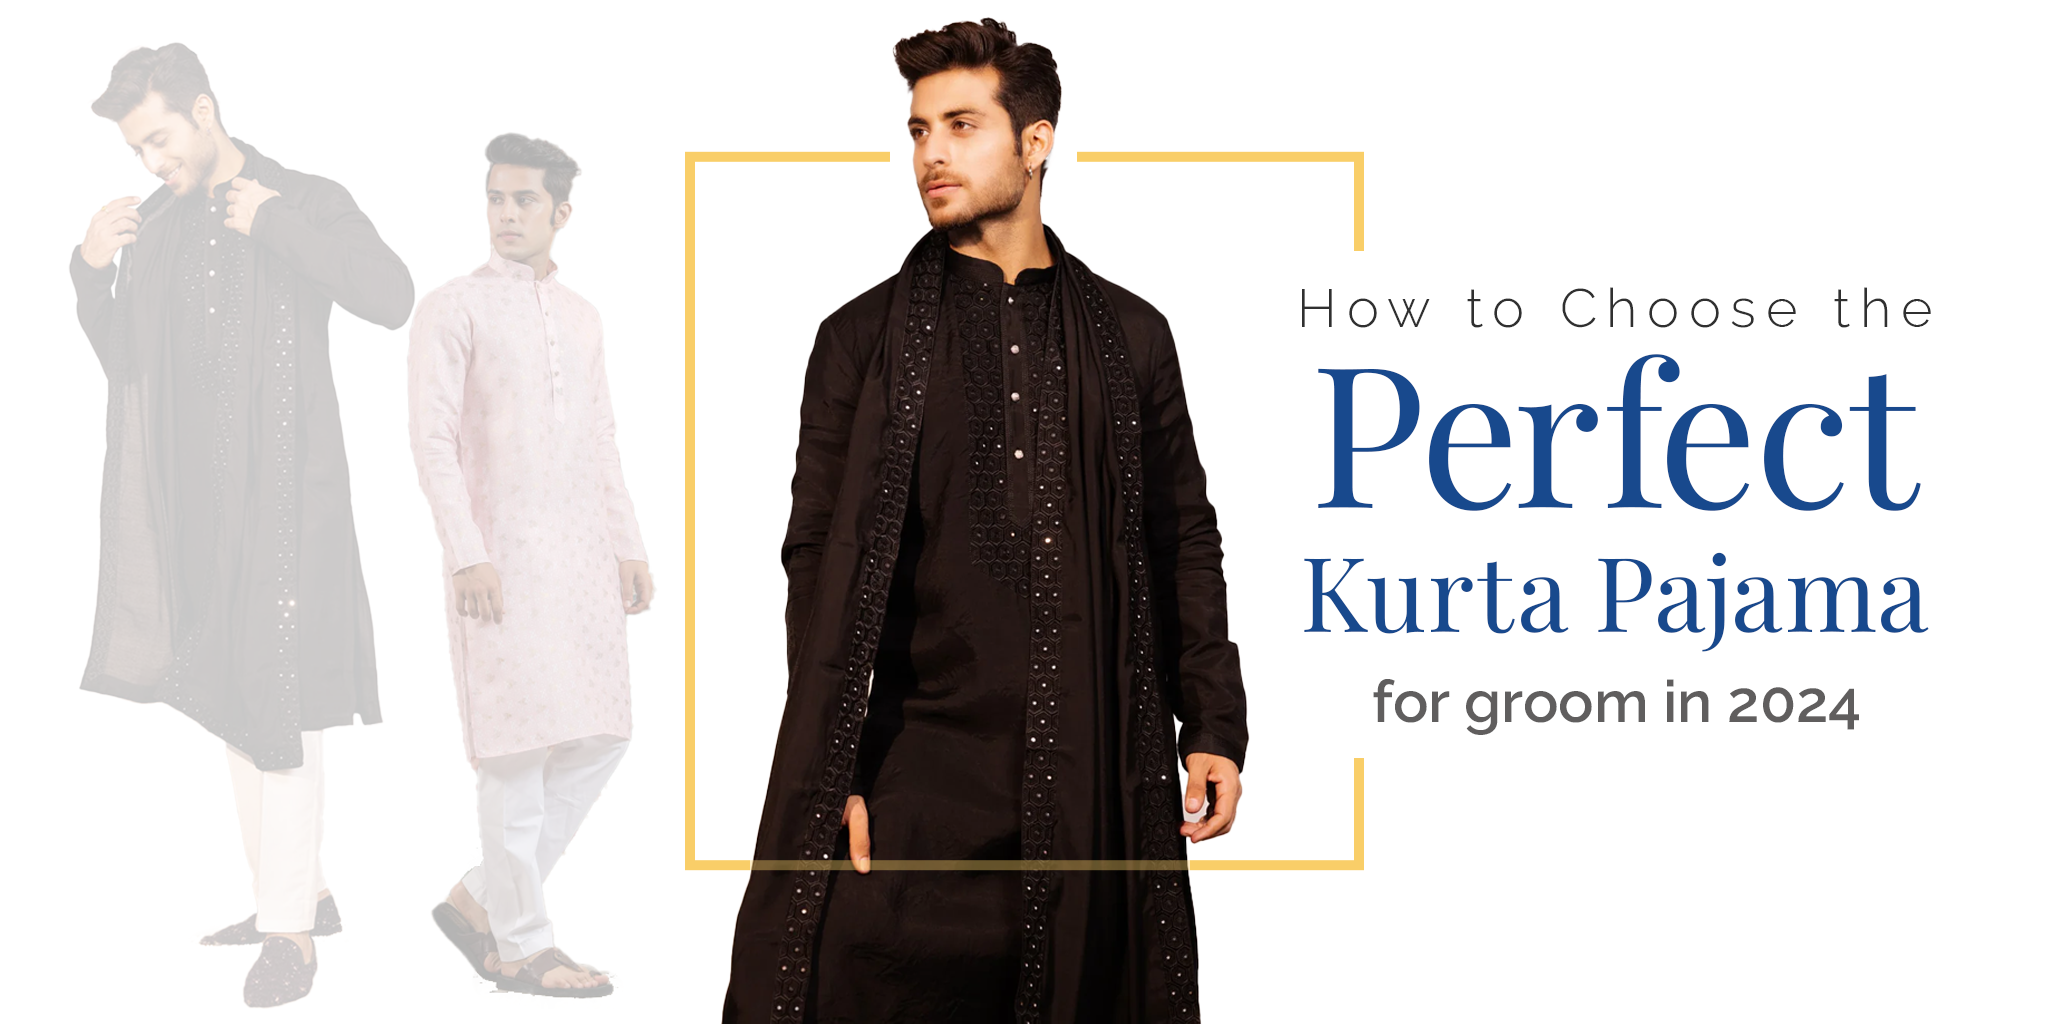 How to Choose the Perfect Kurta Pajama for Groom in 2024